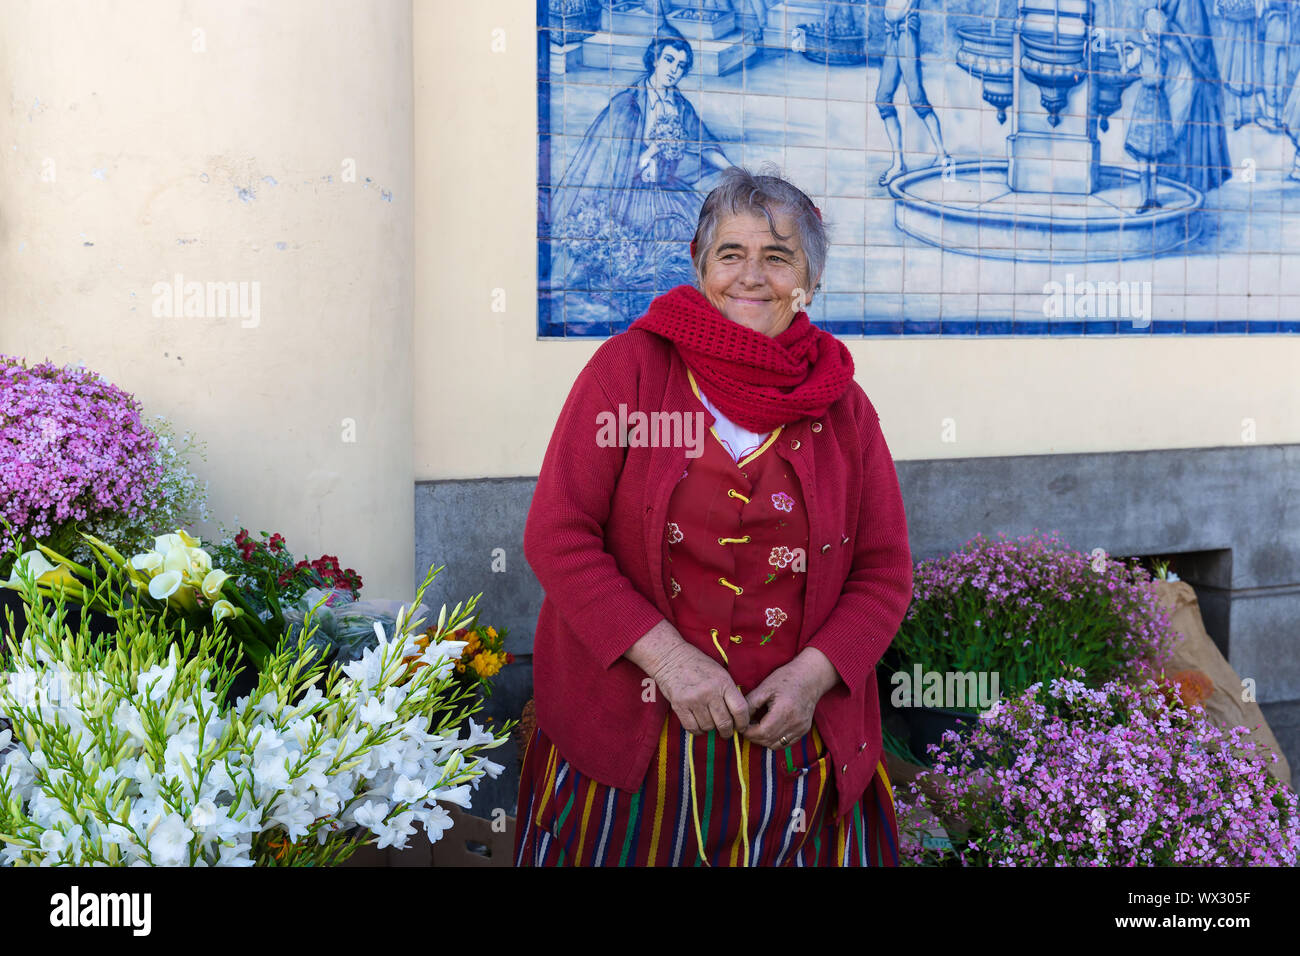 Traditional woman sells flowers at a market of Funchal, Portugal Stock Photo